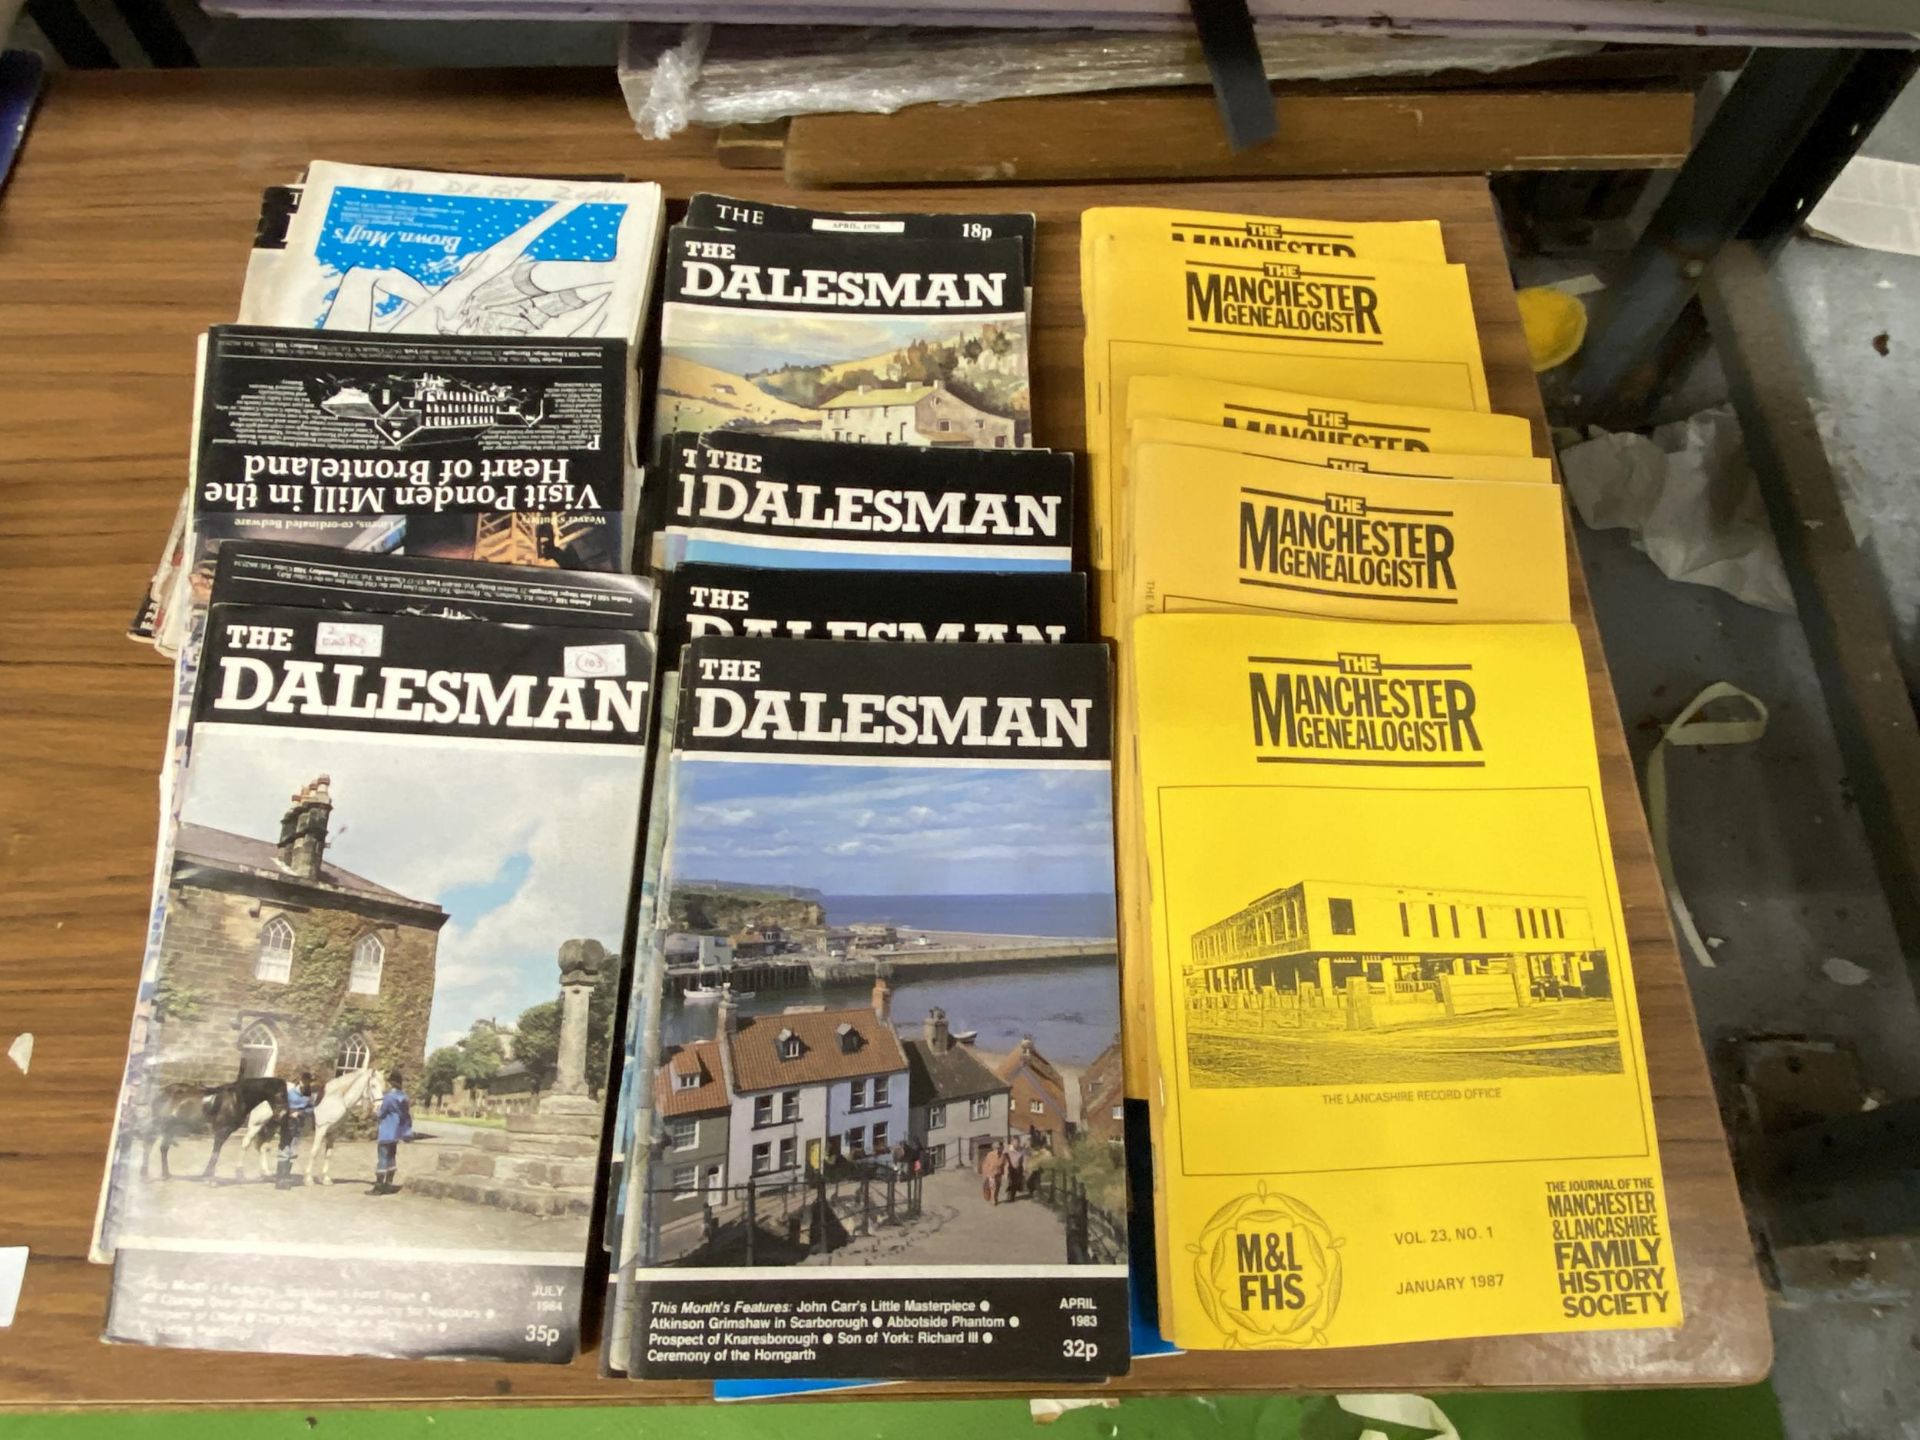 A GROUP OF THE DALESMAN AND MANCHESTER GENEALOGIST BOOKS